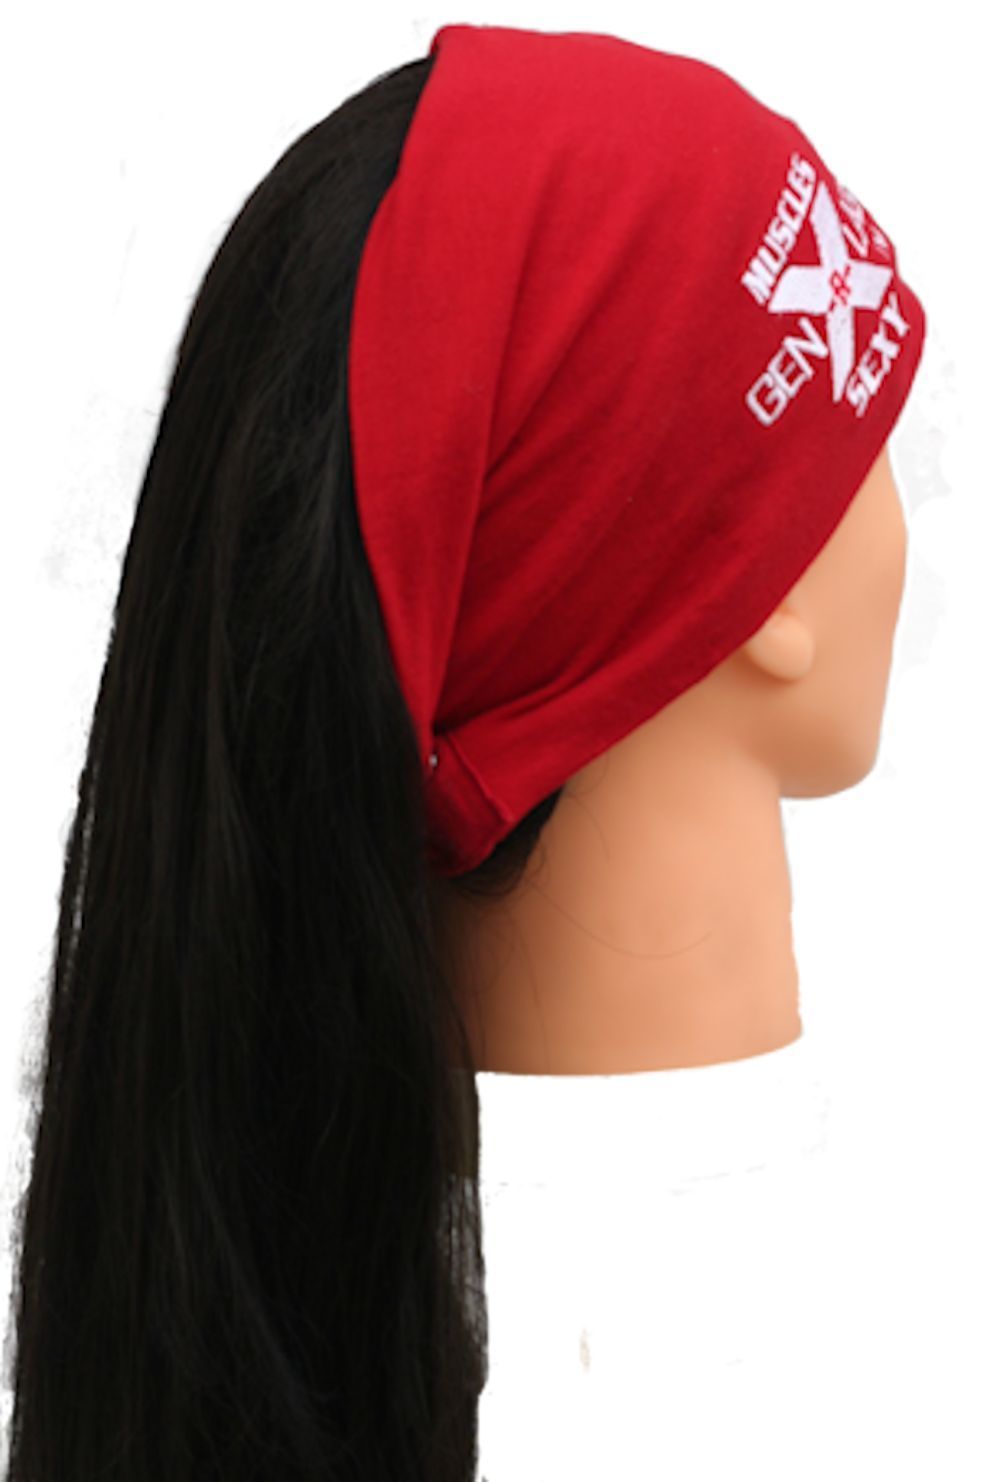 GenXLabs Muscle-R-Sexy Workout Cotton Hair Beanie Red